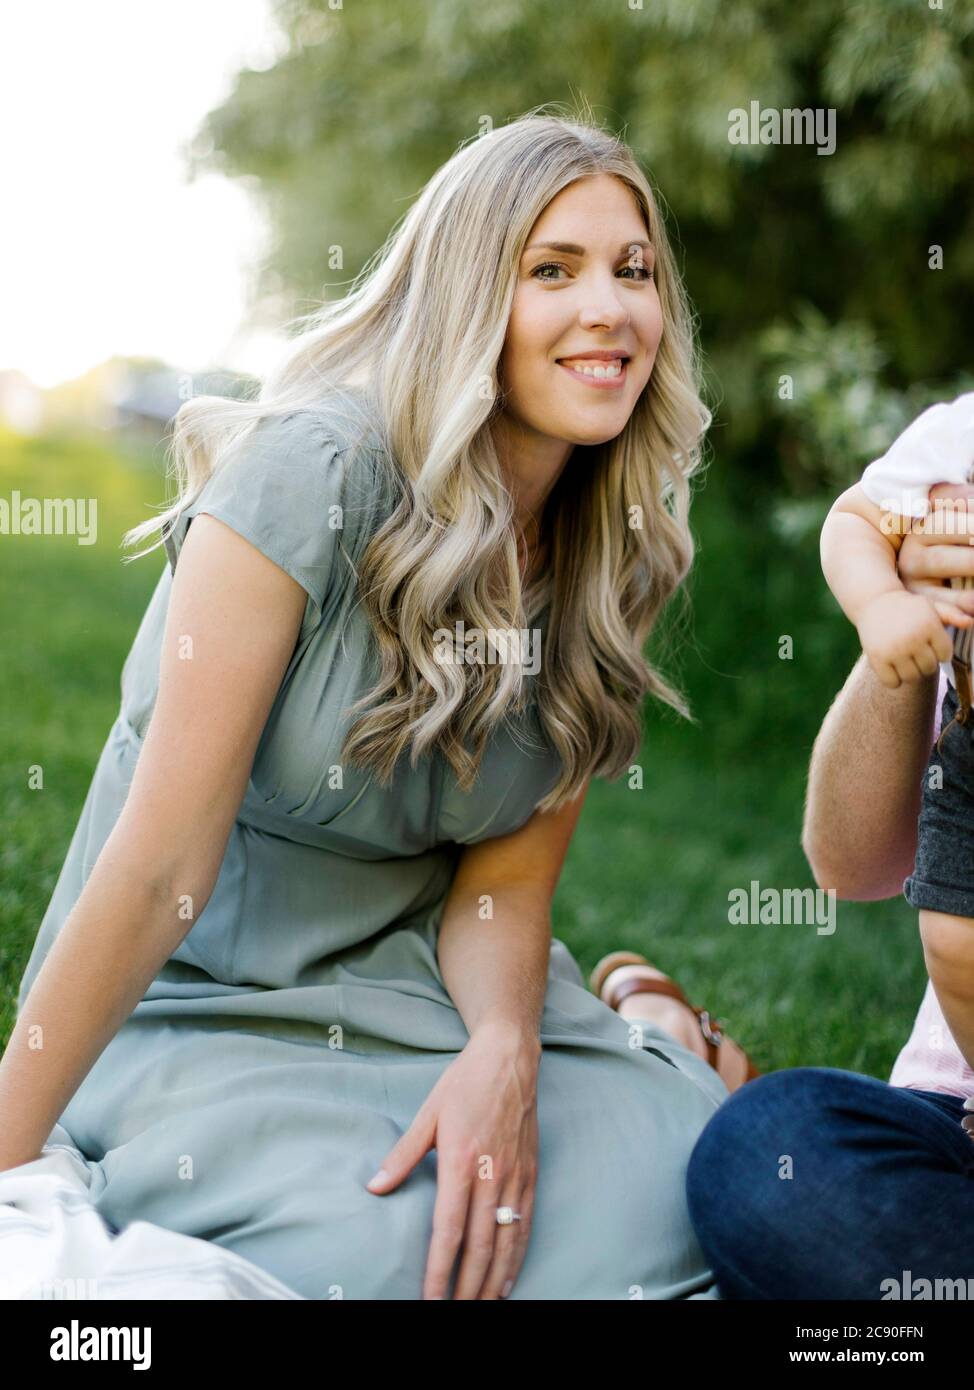 Outdoor portrait of smiling woman sitting o grass with her family nearby Stock Photo